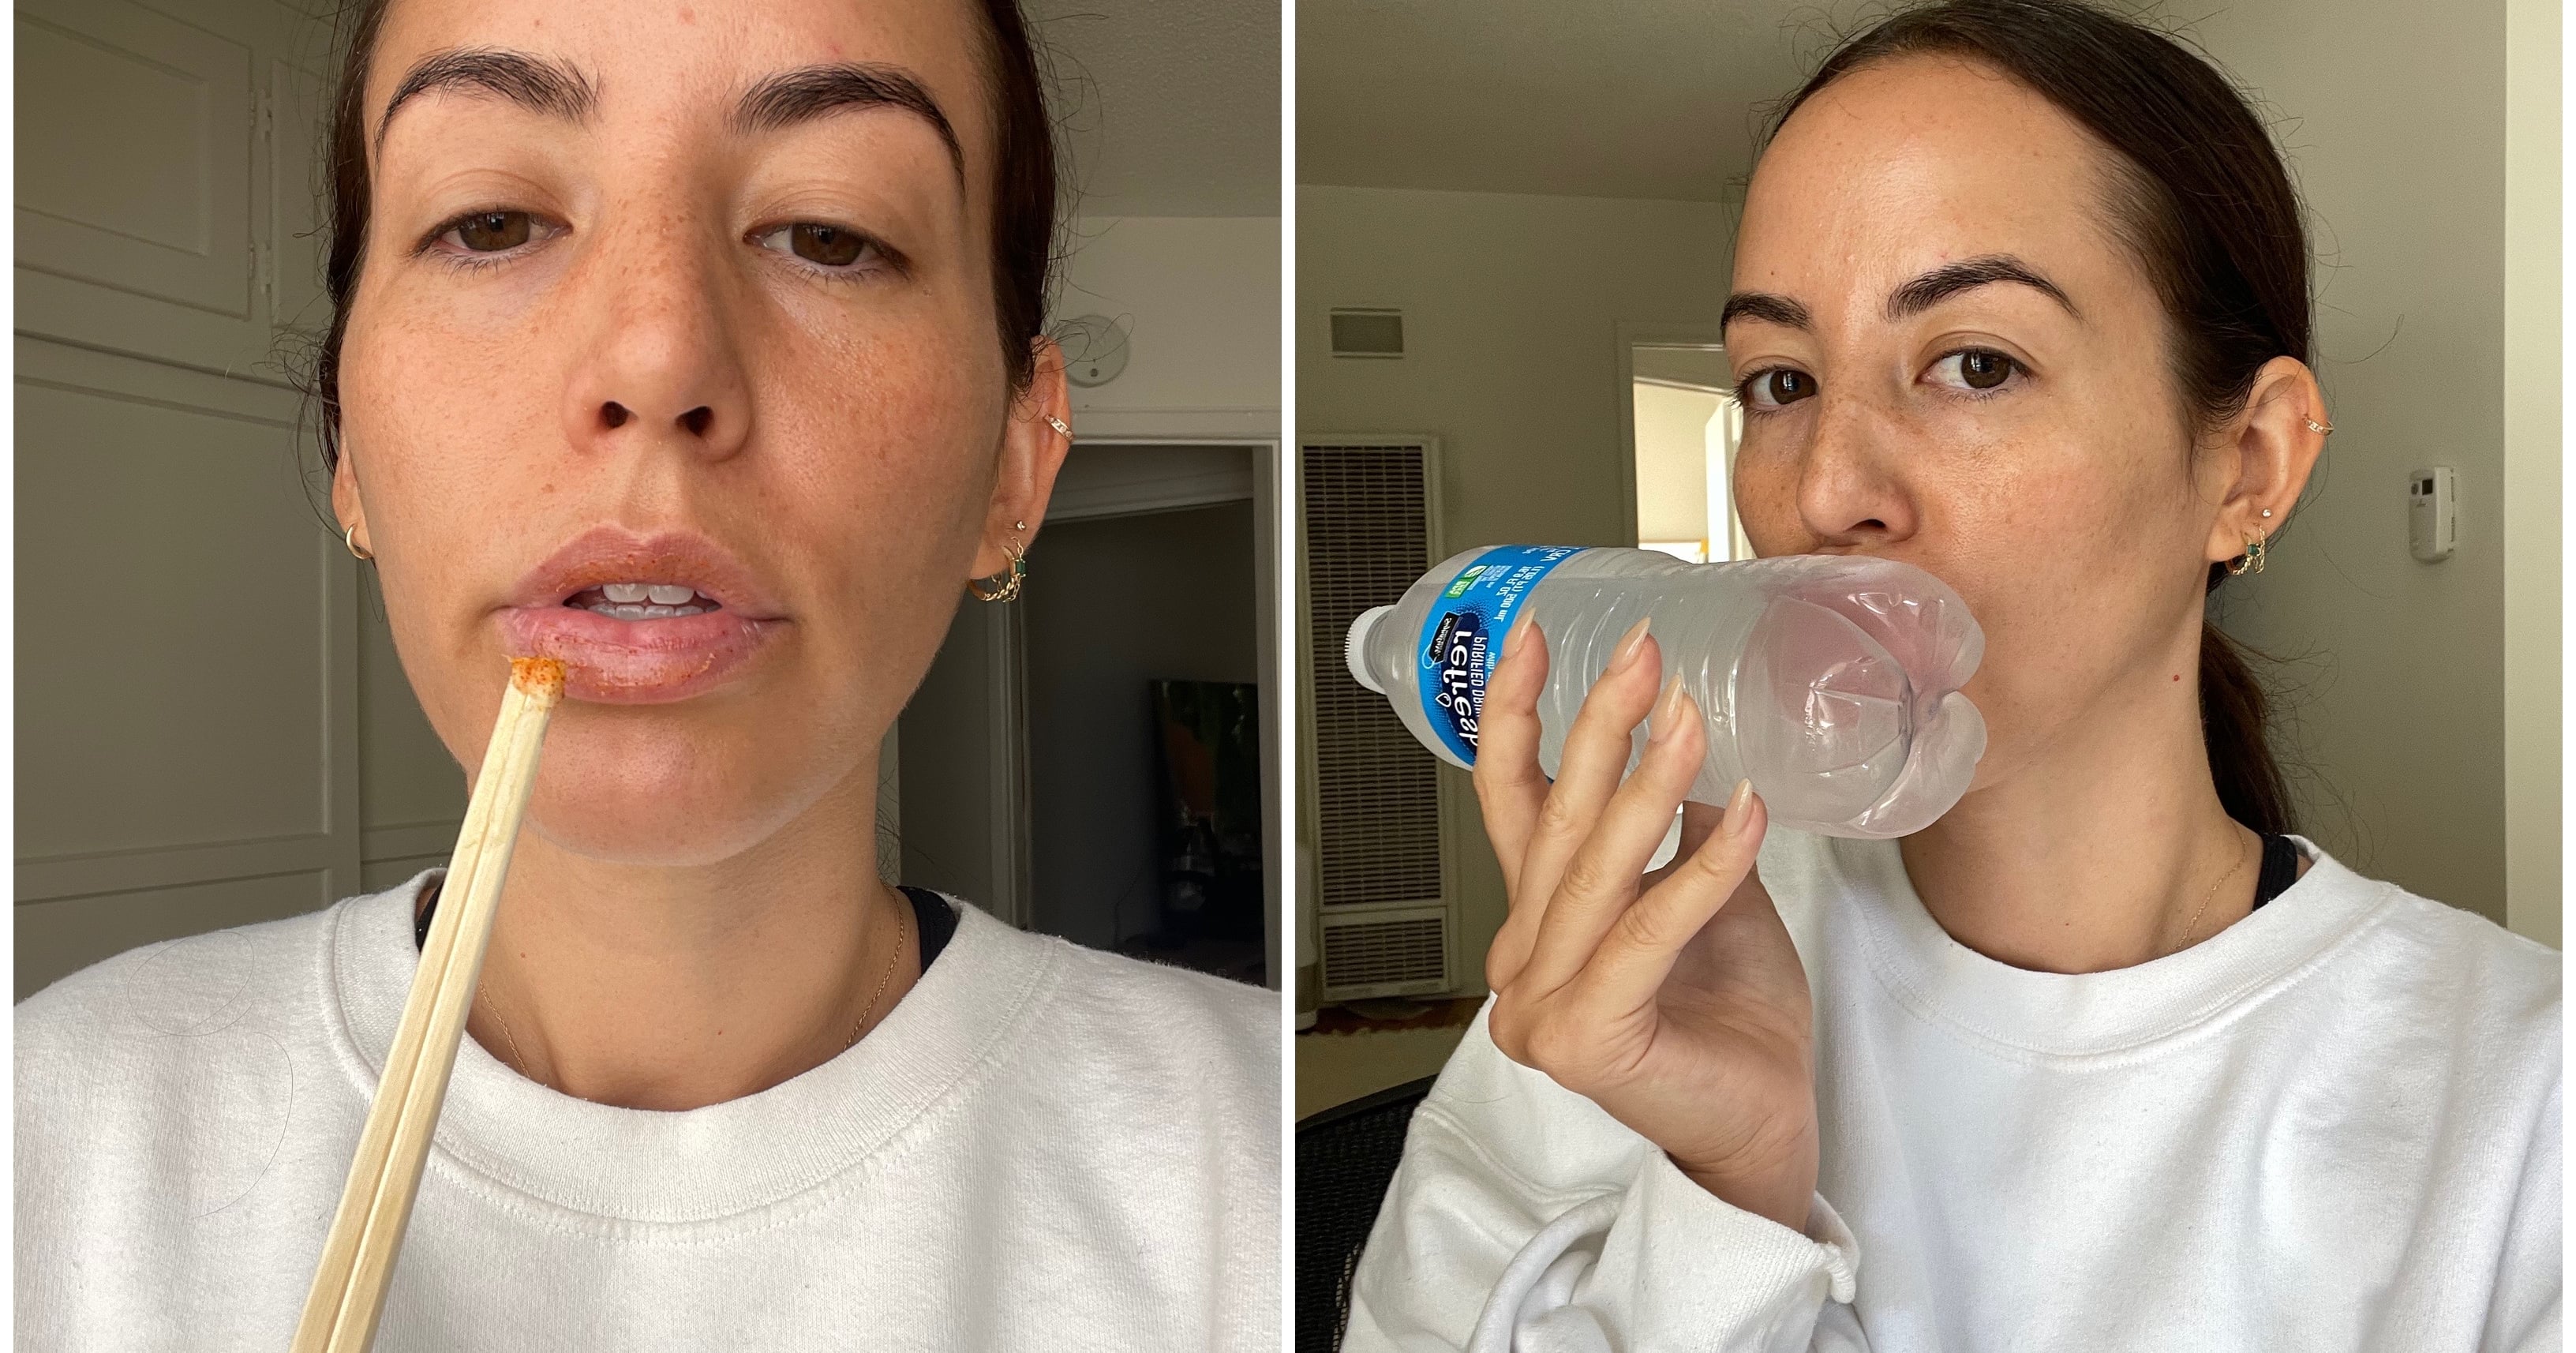 Chloe Cherry’s Wild Hack For Fuller Lips Works, but It Hurts